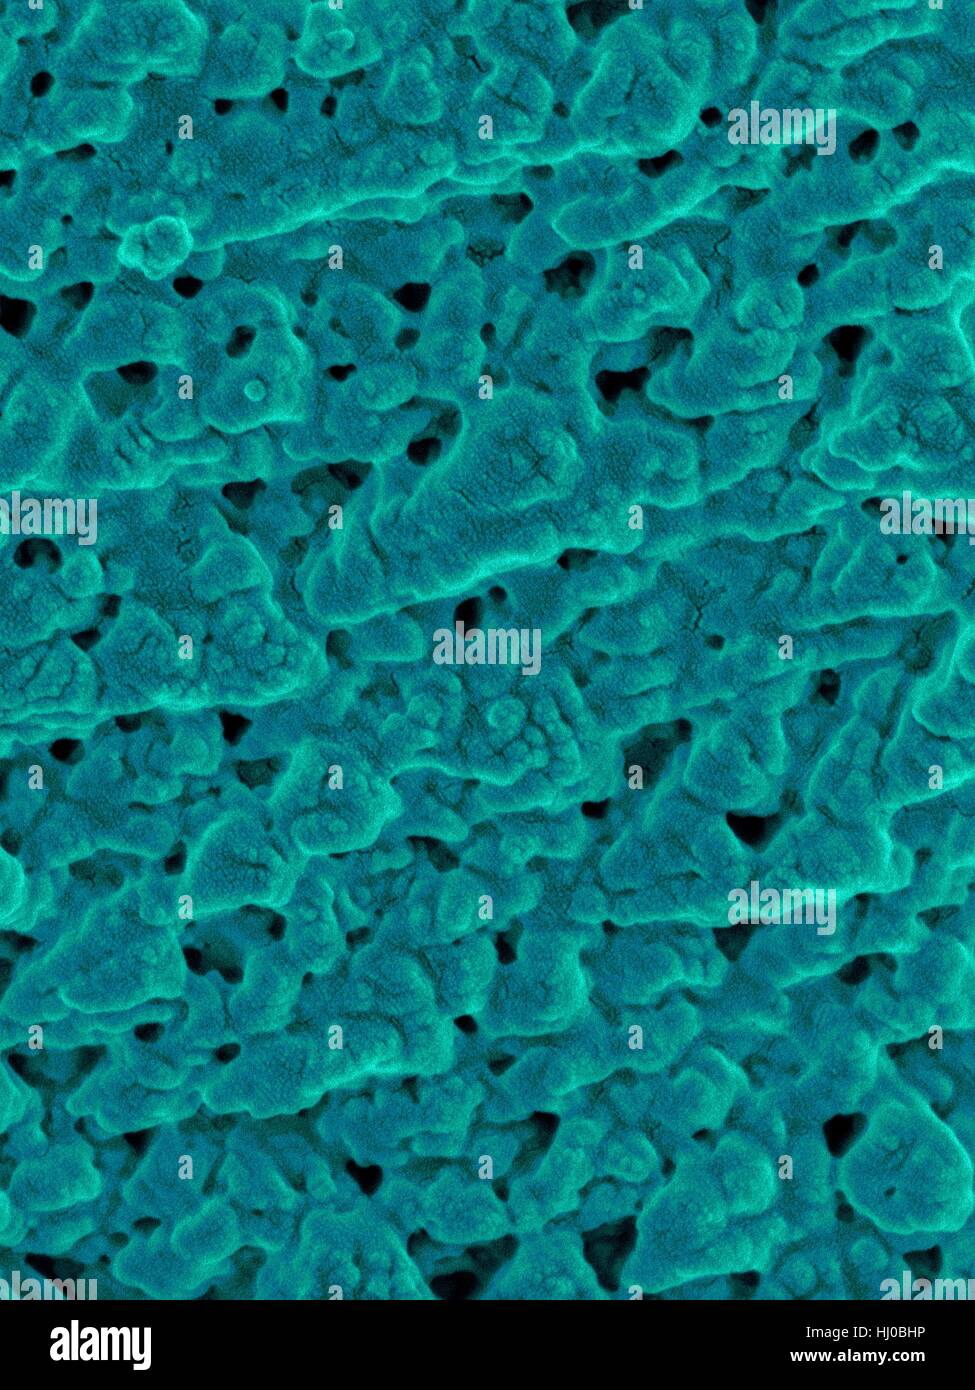 Coloured scanning electron micrograph (SEM) Emu eggshell surface tiny pores (Dromaius novaehollandiae).Calcium carbonate crystals make up Emu eggshell.Bird eggshells are semipermeable membranes composed of mineralized calcium carbonate filled thousands of pores.The eggshell protects embryo inside Stock Photo